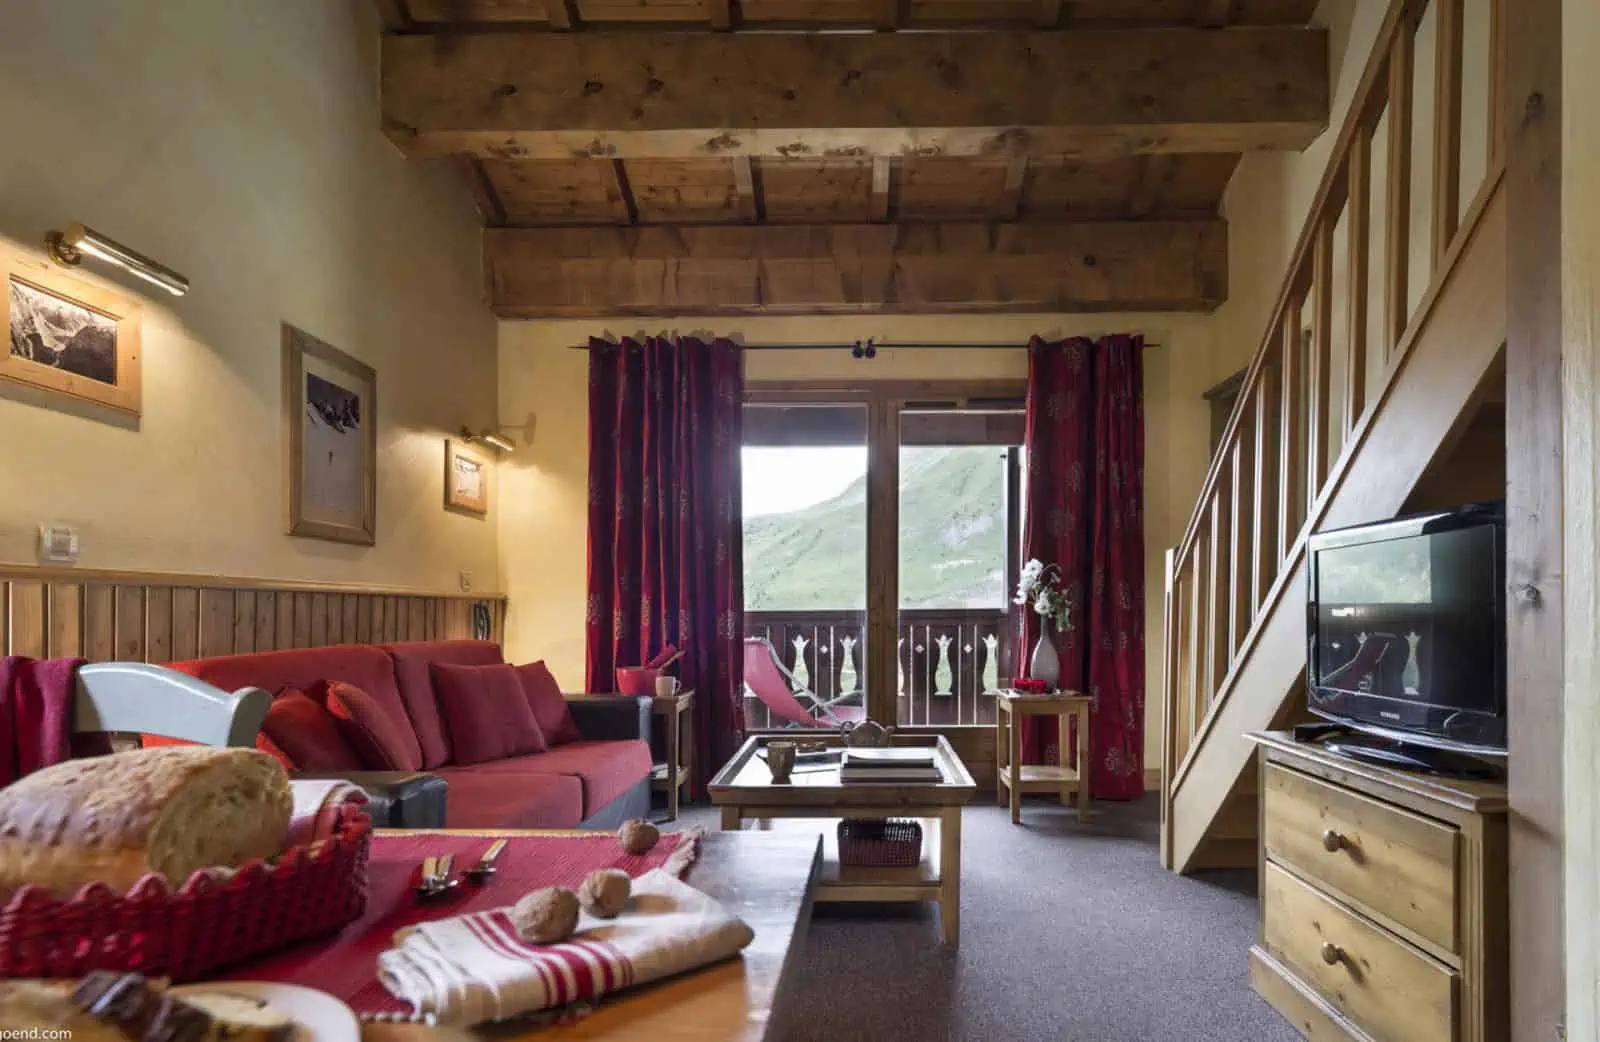 Village Montana apartment in Tignes - 2 bedrooms and 1 cabine